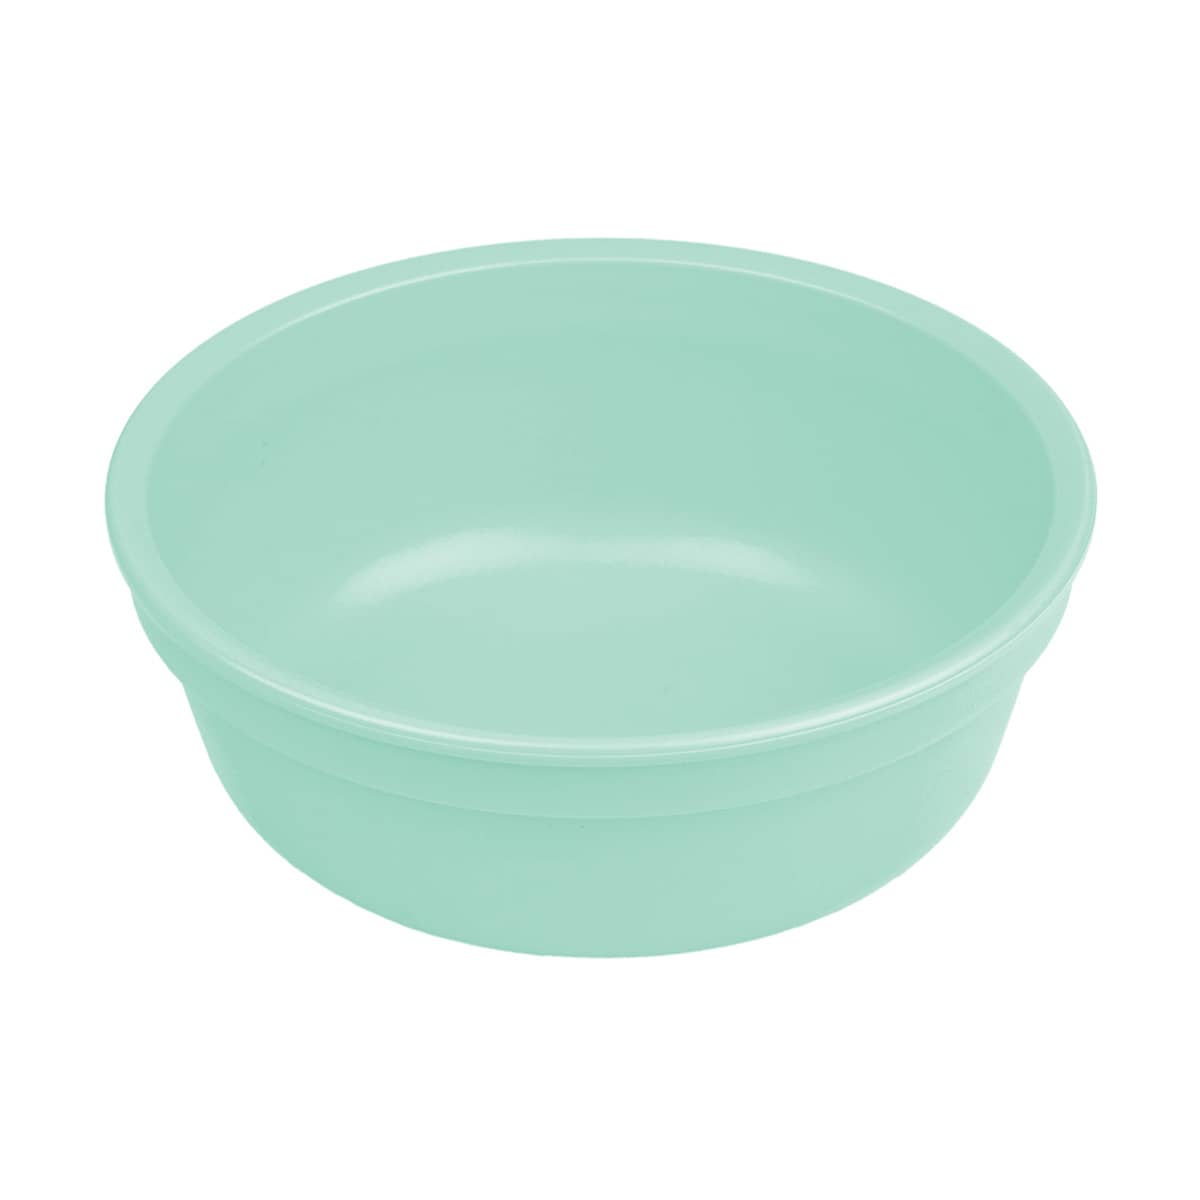 Re-Play Recycled Bowl - Mint